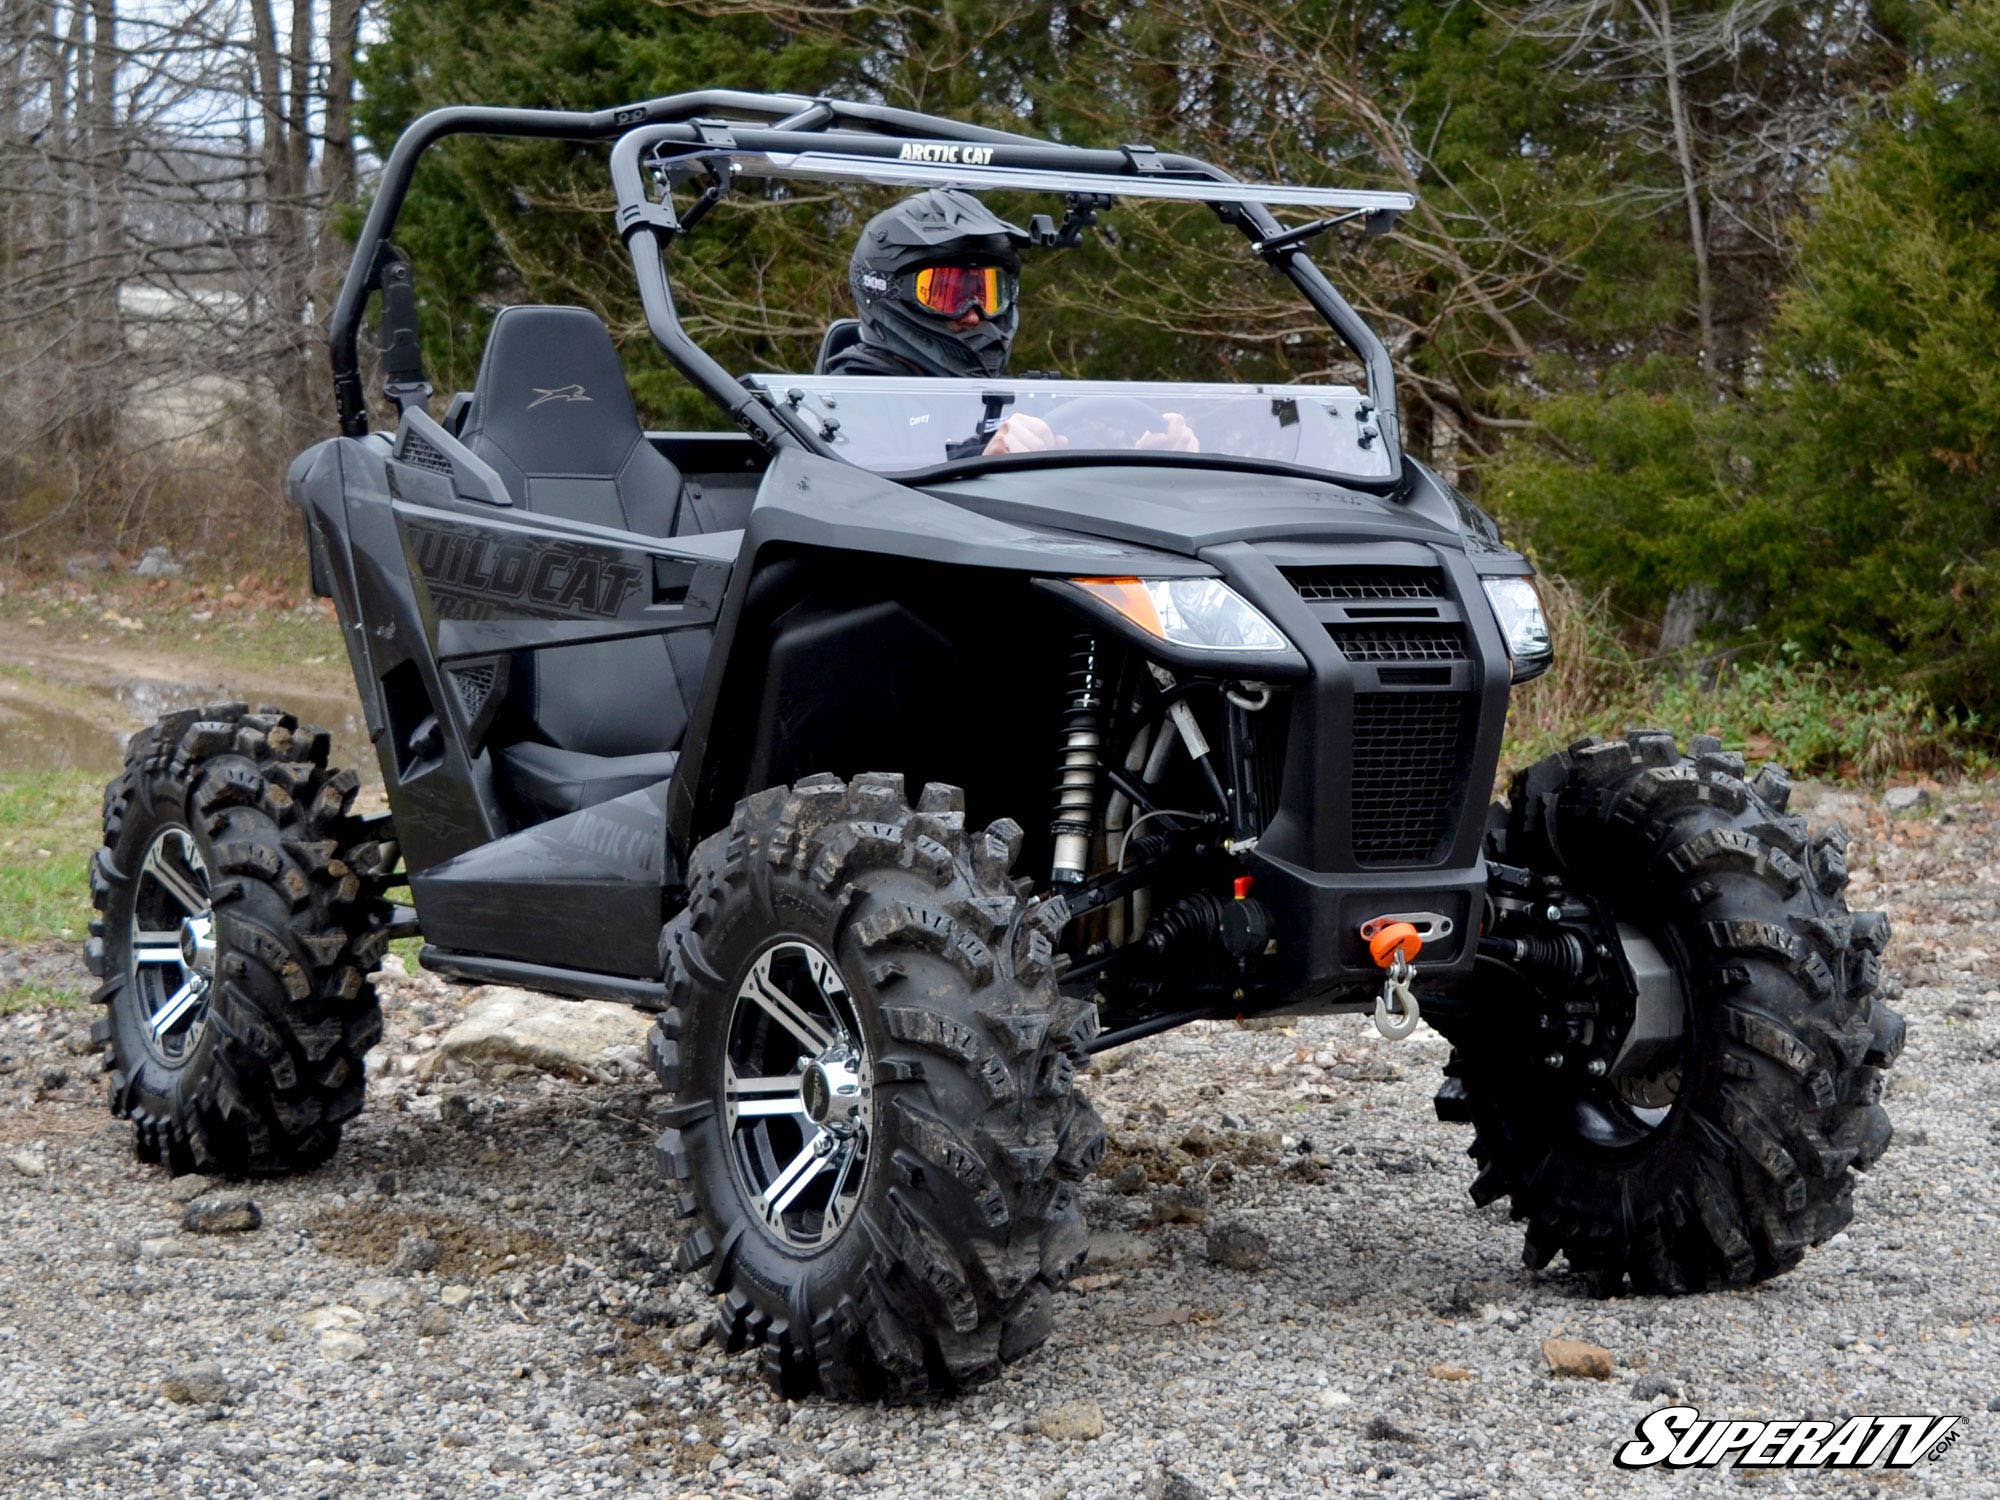 Arctic Cat Wildcat Trail Sport UTV parked outdoors, featuring aggressive tread tires and a visible flip windshield, in a rugged off-road setting.